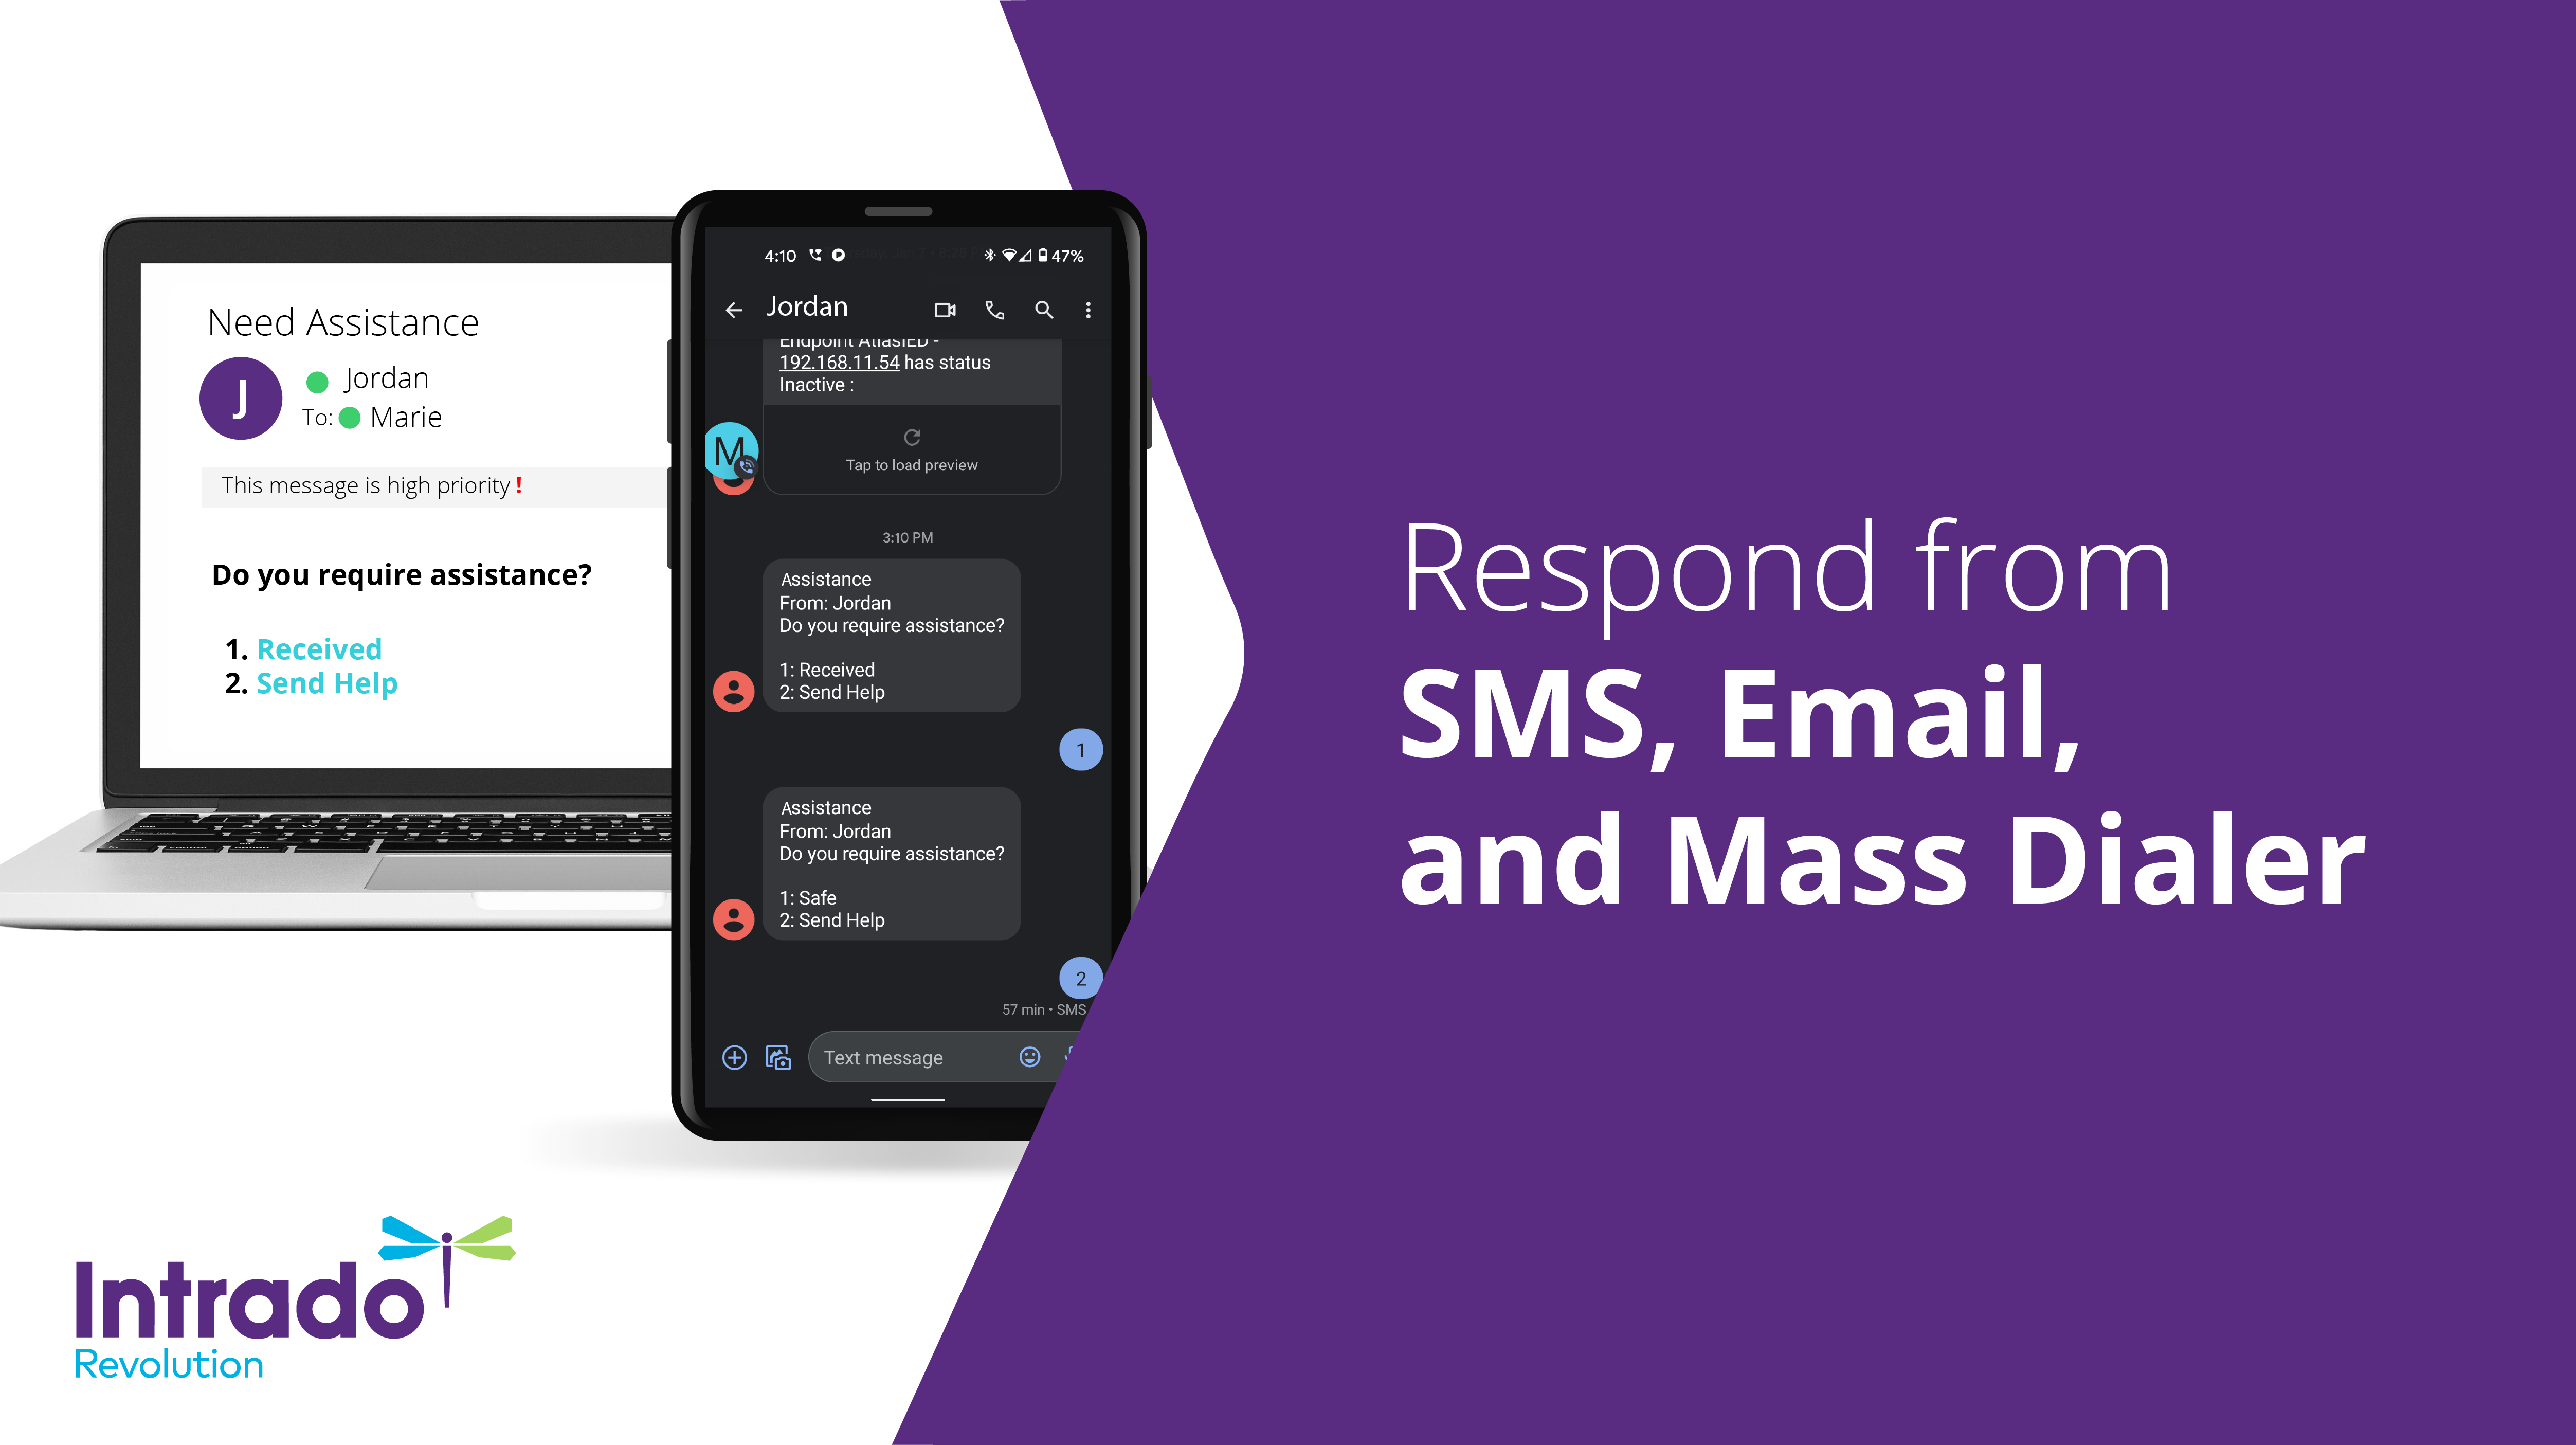 SMS, Email, and Mass Dialer Responses